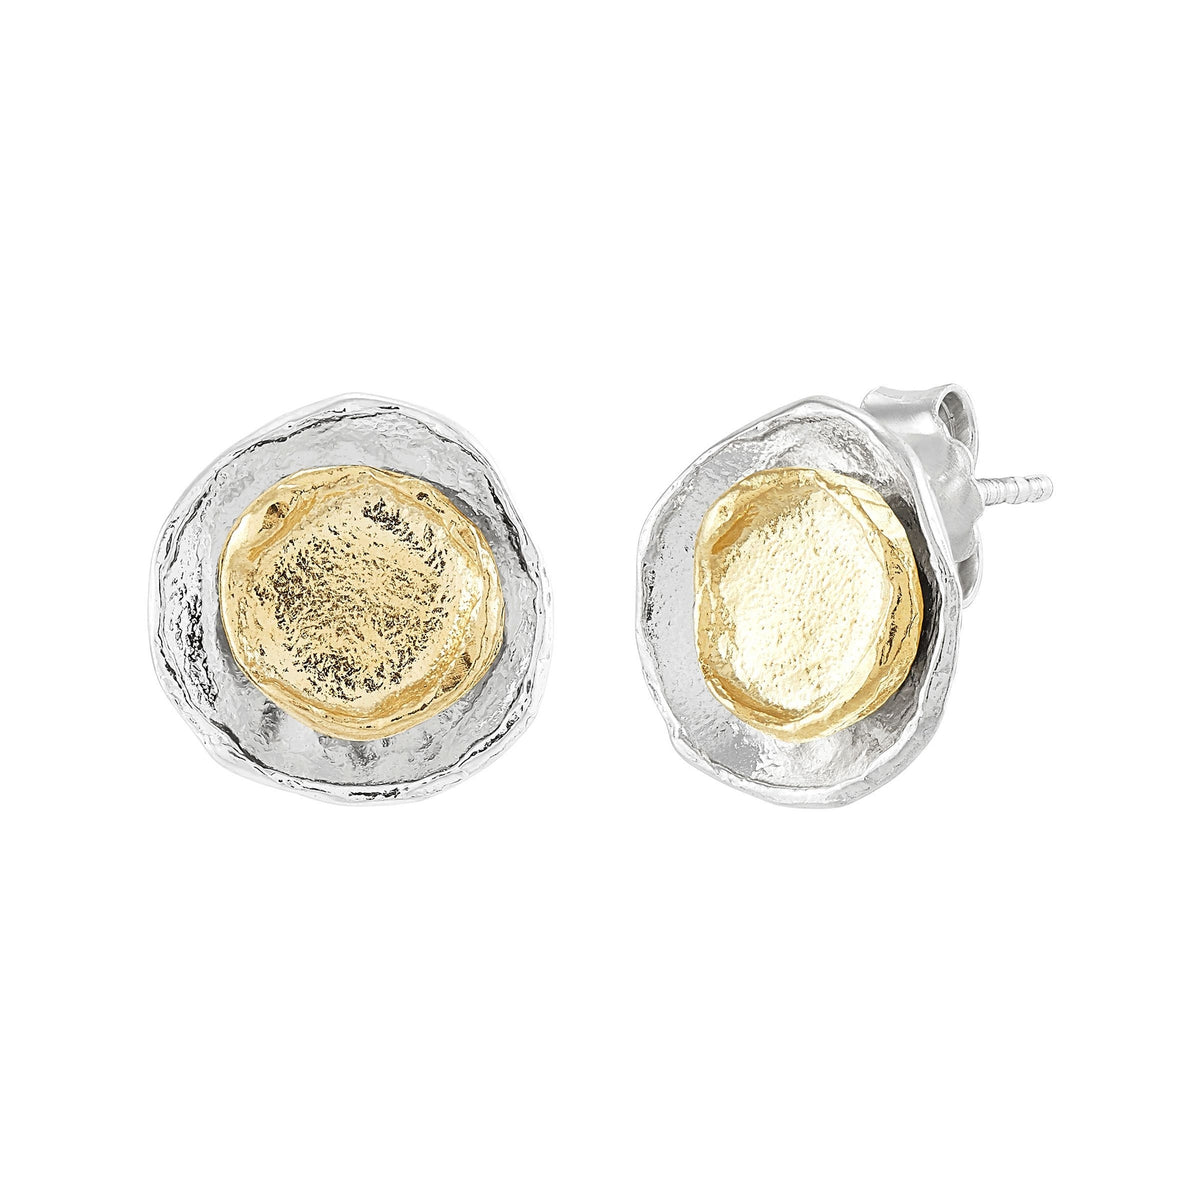 Silpada 'Another Realm' Stud Earrings in Sterling